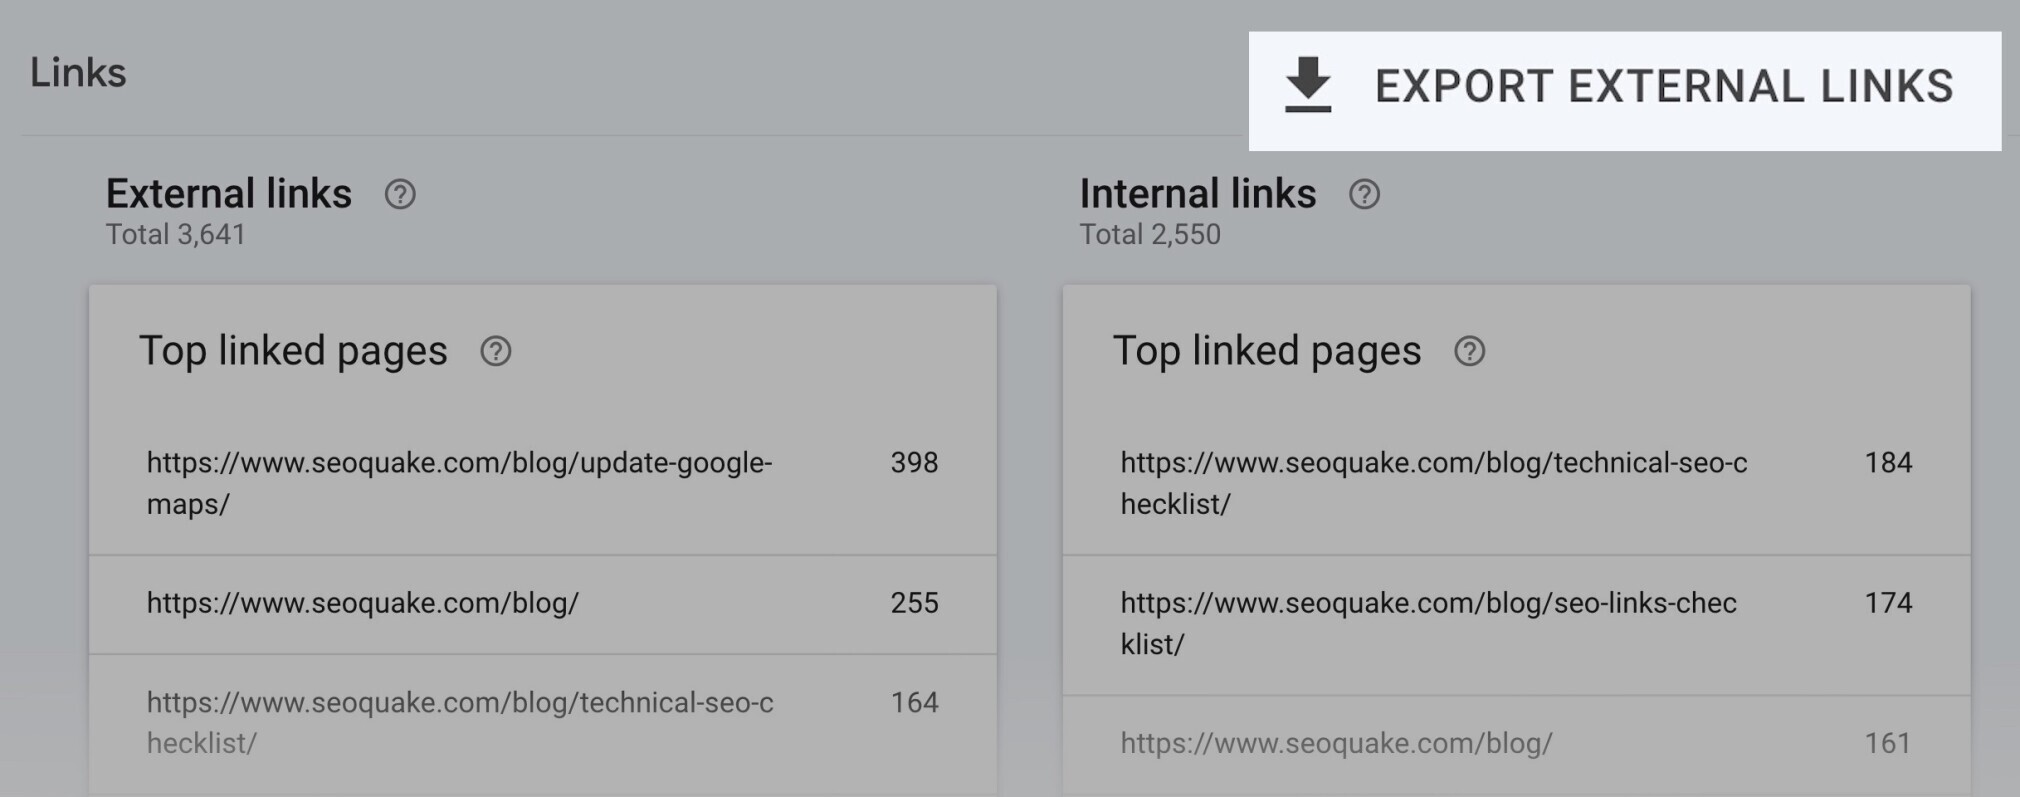 google search console export external links